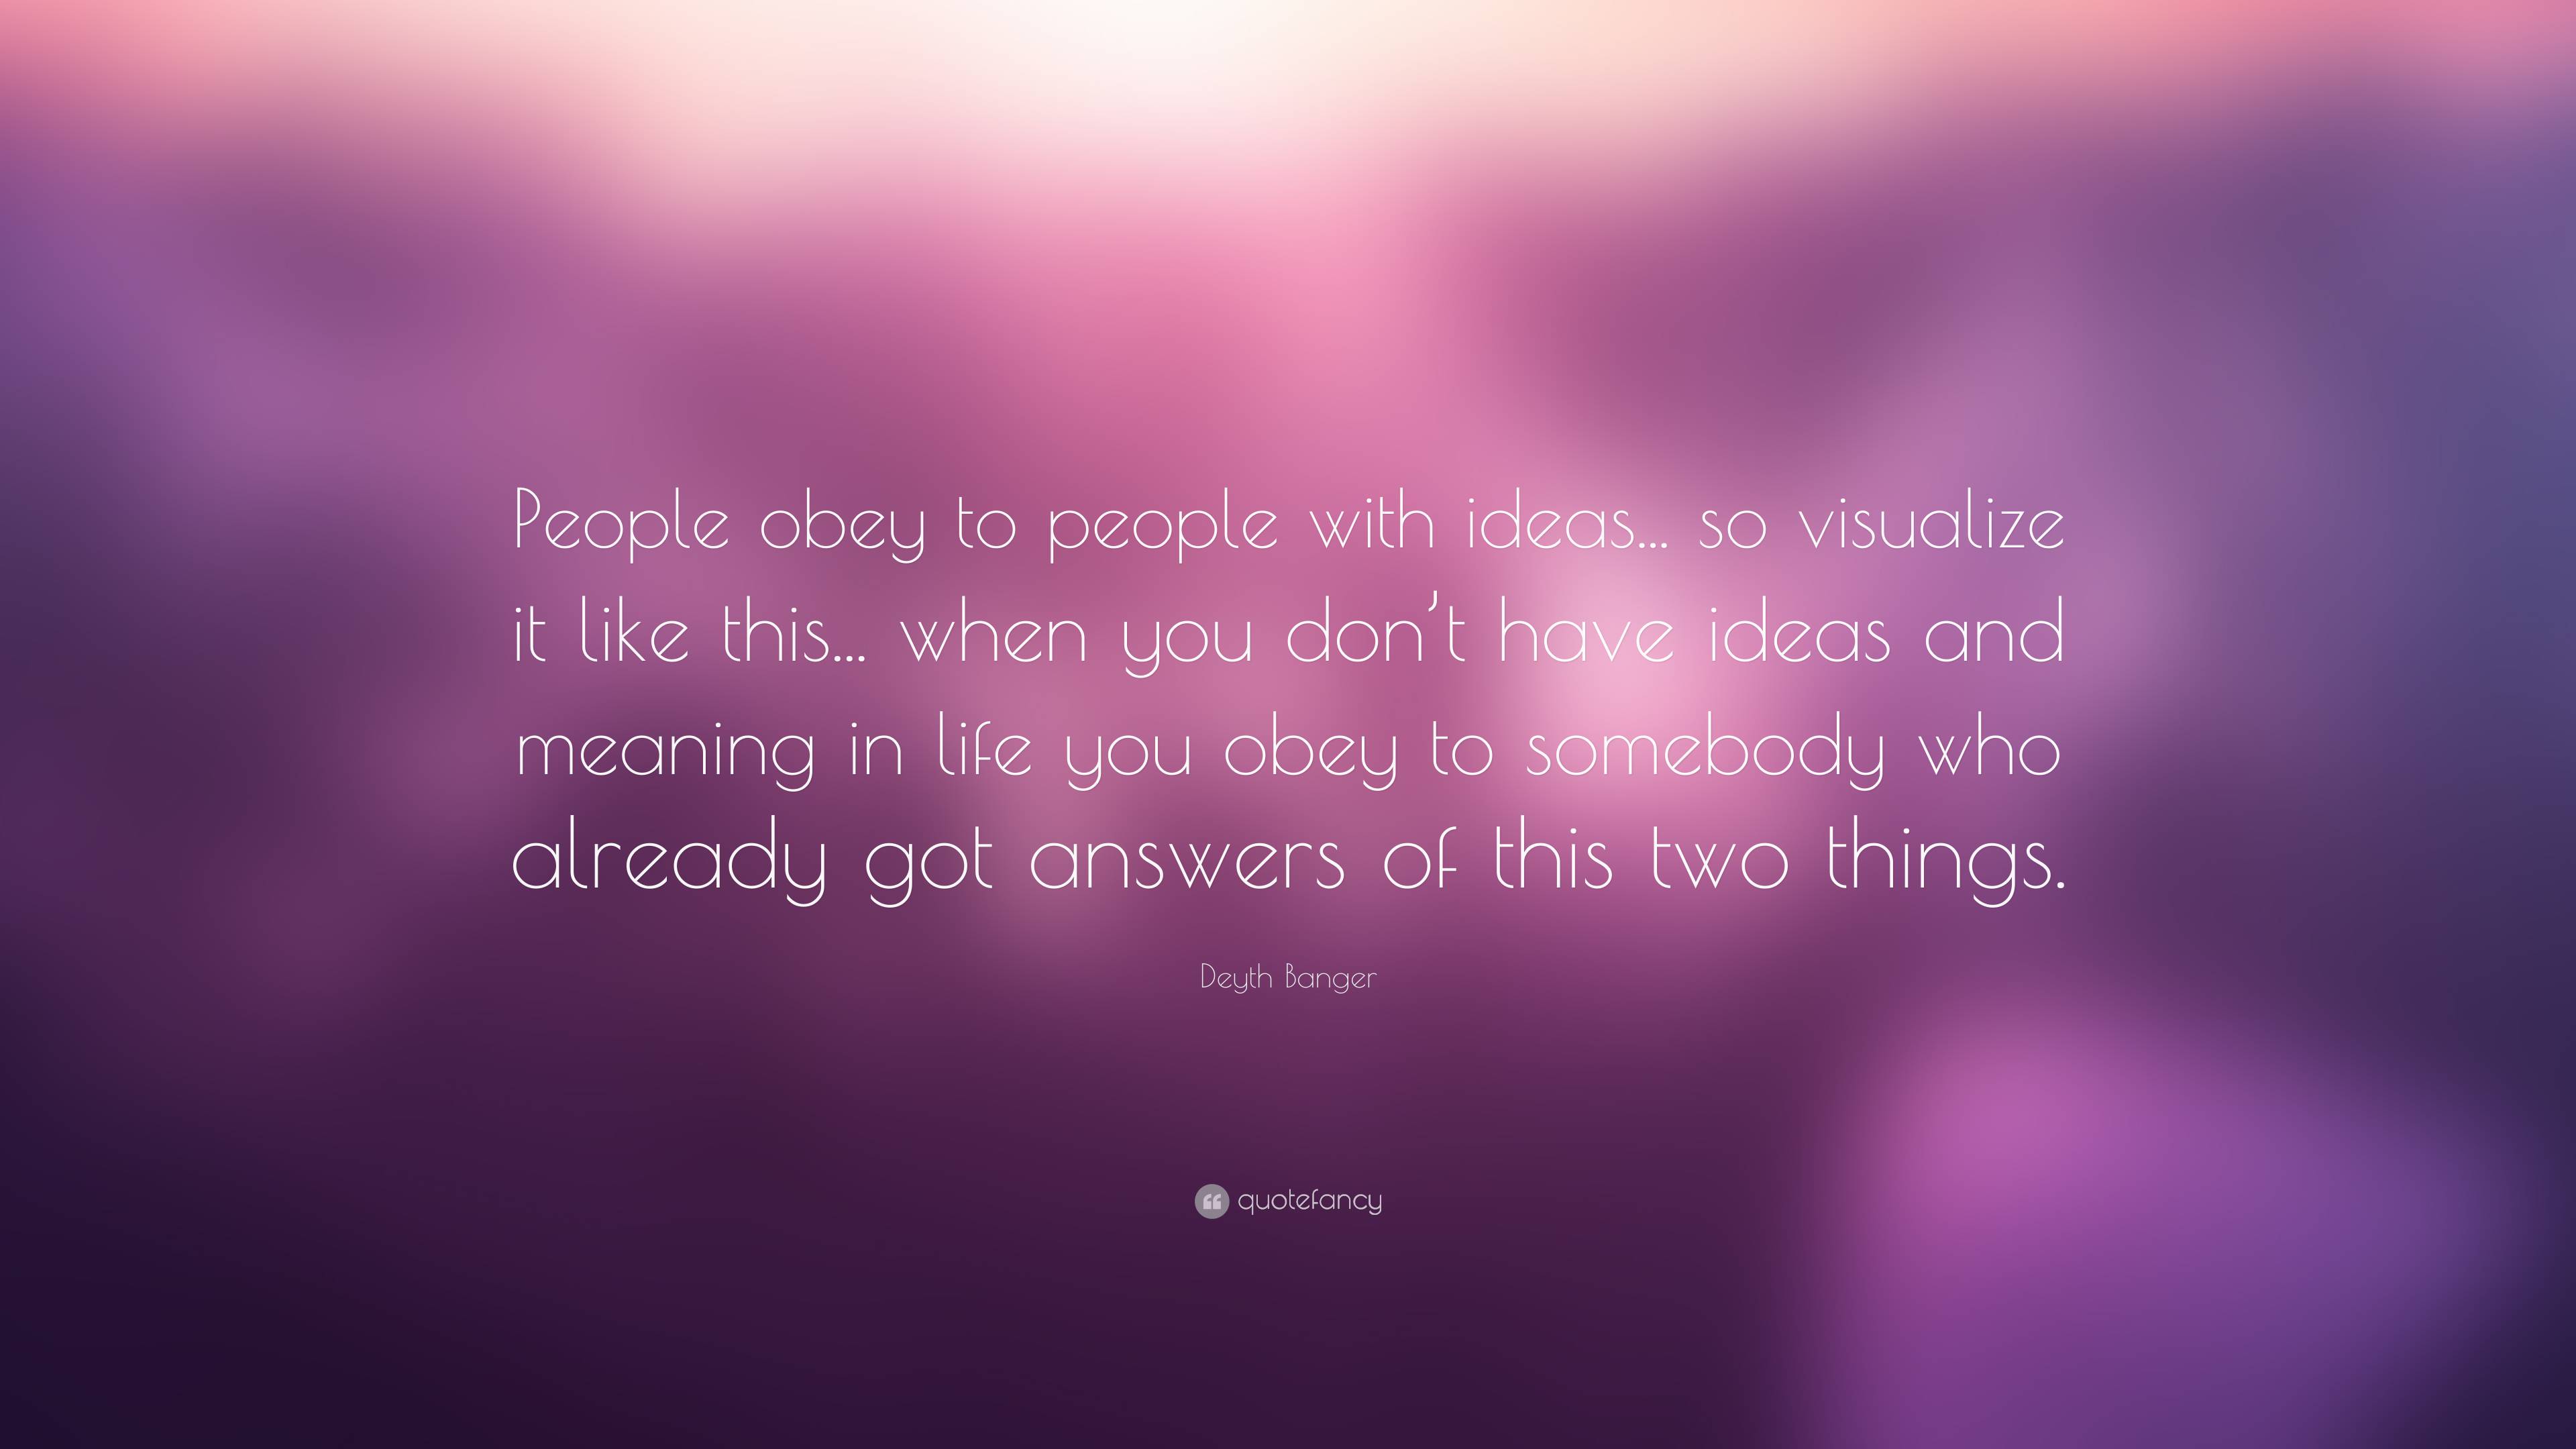 Deyth Banger Quote: “People obey to people with ideas... so visualize ...